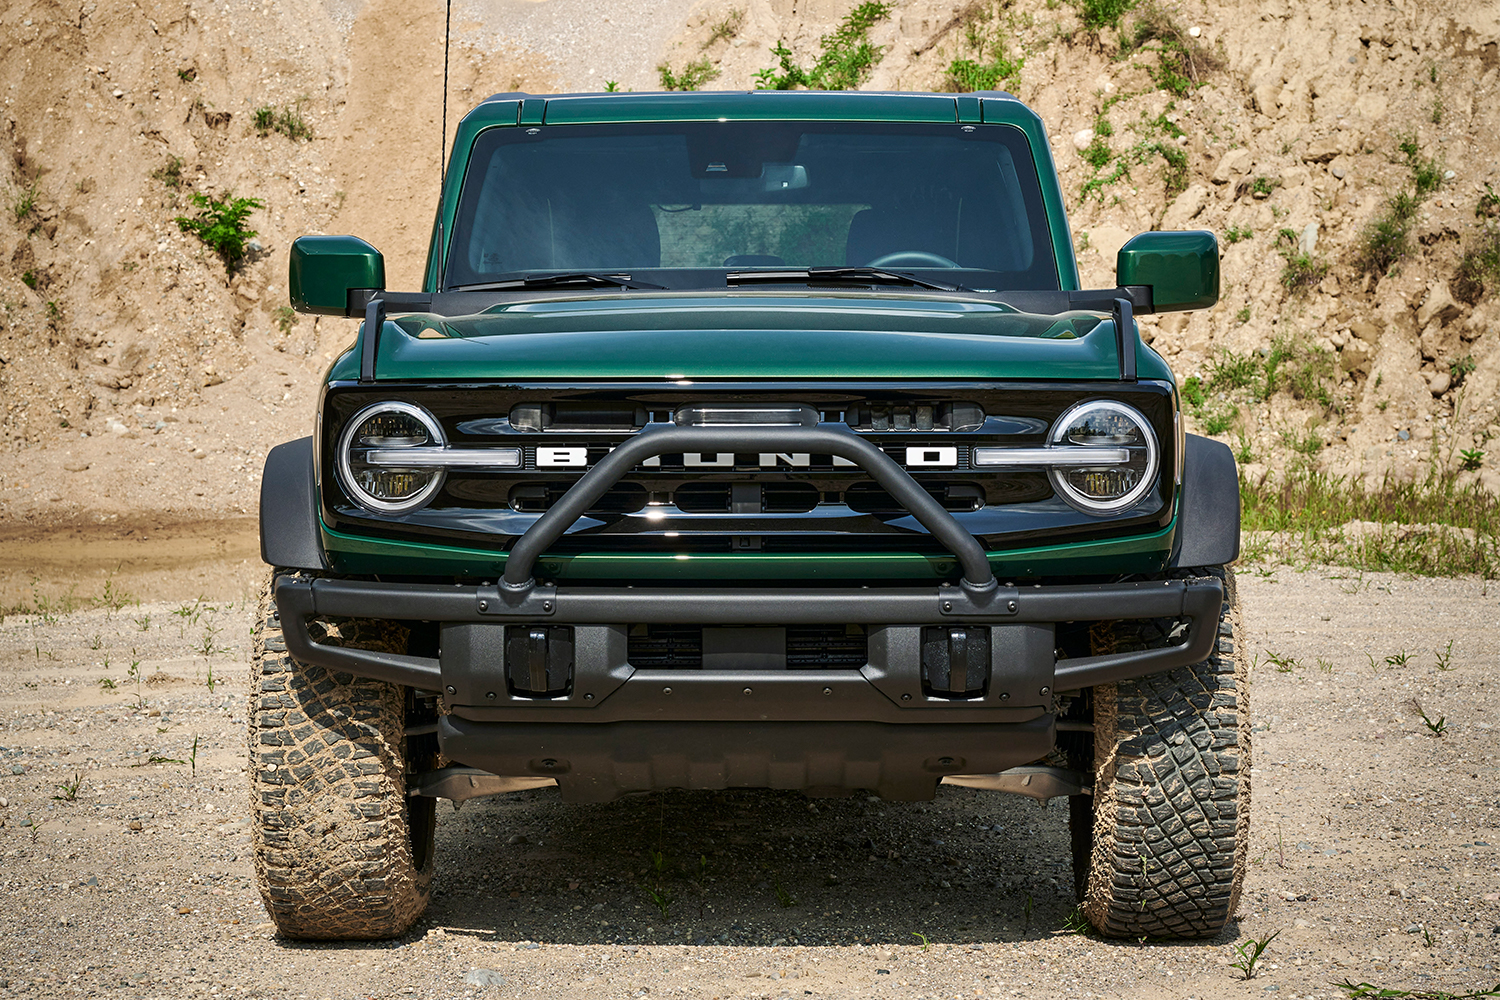 The 2022 Ford Bronco Outer Banks in Eruption Green. We reviewed the new Wildtrak Bronco and weren't overly impressed.